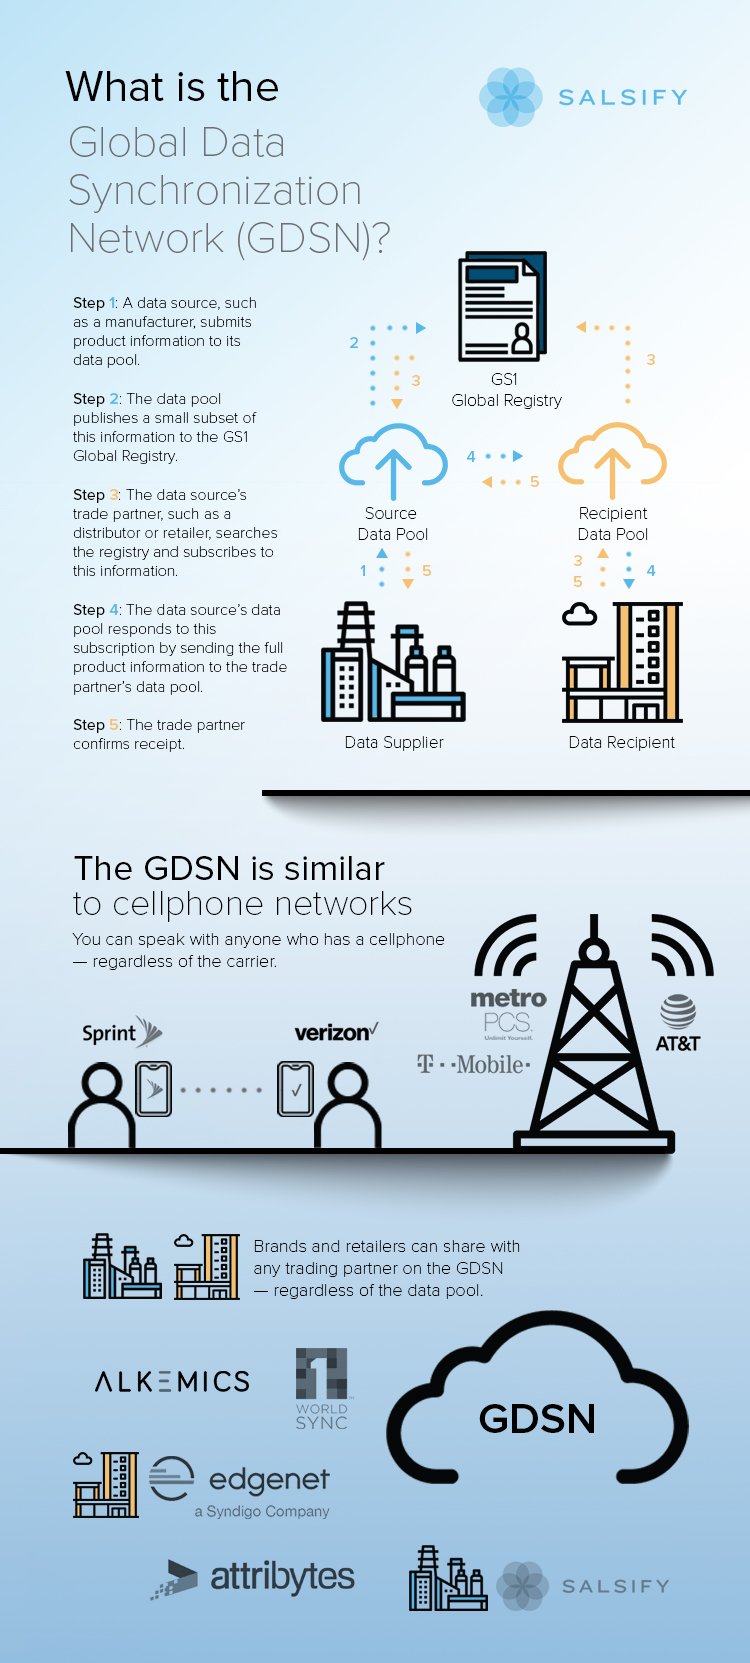 GDSN Data Pools What Is the GDSN and How Does It Work Infographic Comparing GDSN to a Cellphone Network Salsify